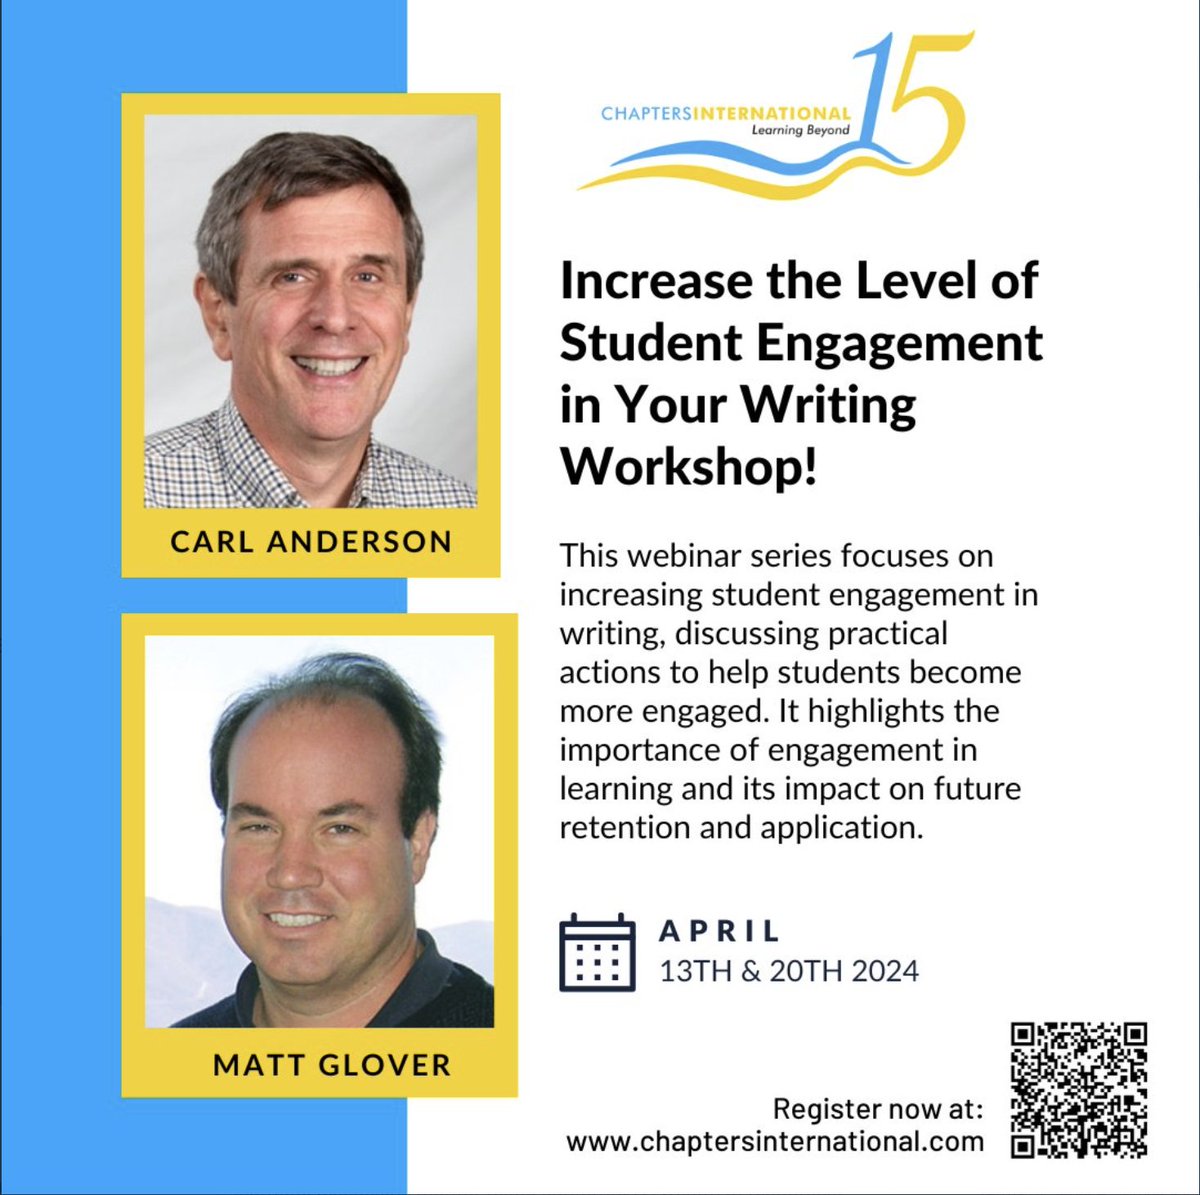 Join @Mattglover123 and me this April for this @ChaptersInt webinar on student engagement in writing, a topic we're especially passionate about. Details: chaptersinternational.com/mailer/carl_ma…